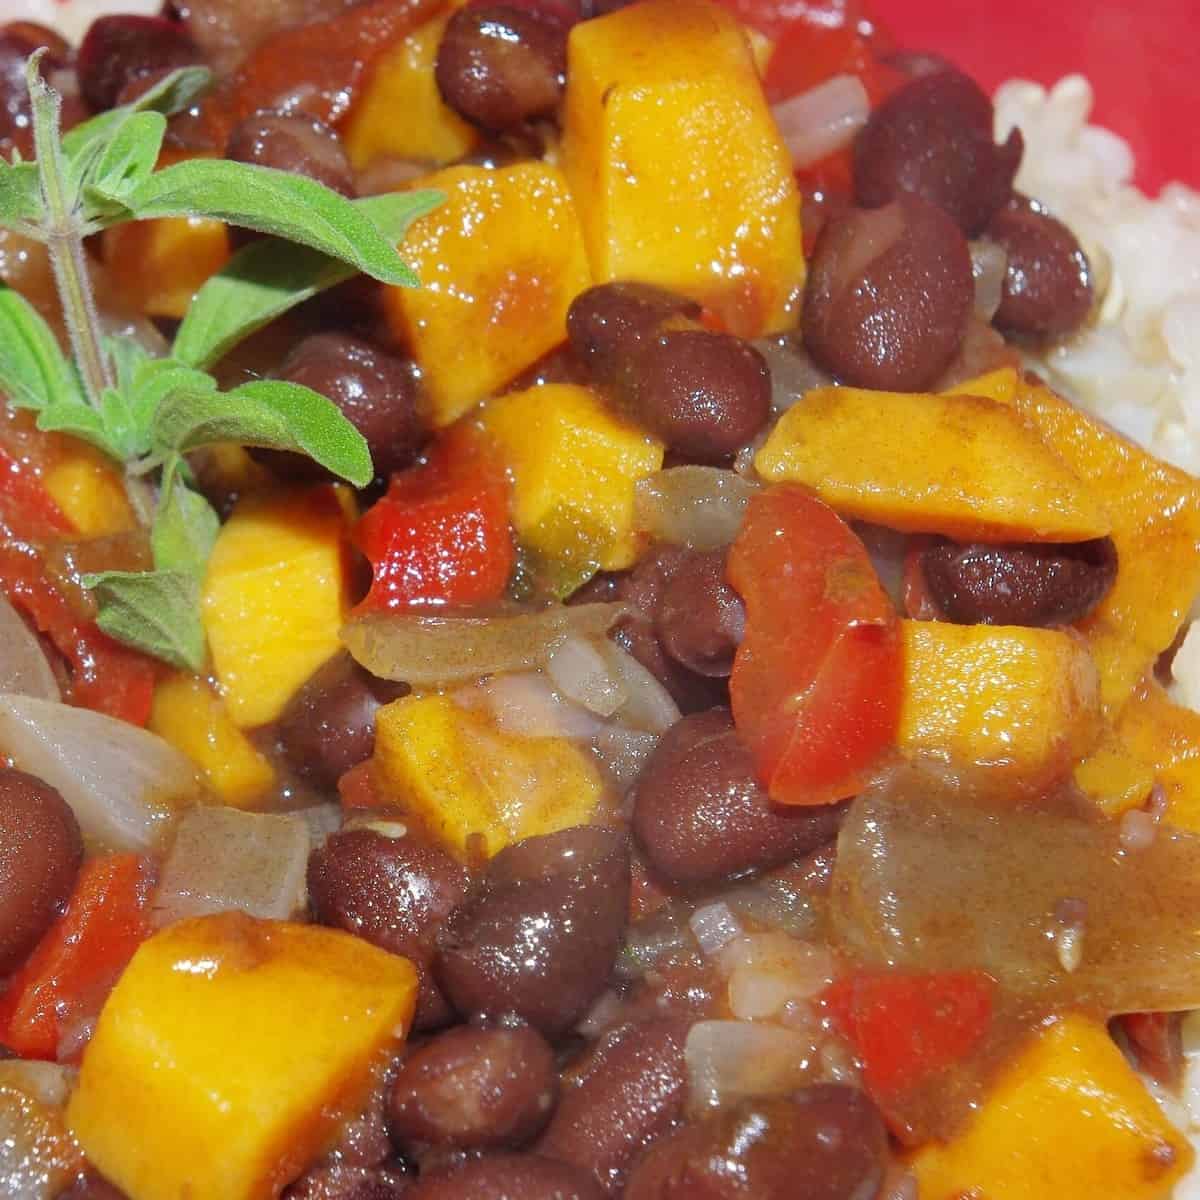 Satisfy Your Cravings with This Mouth-Watering Feijoada Dish